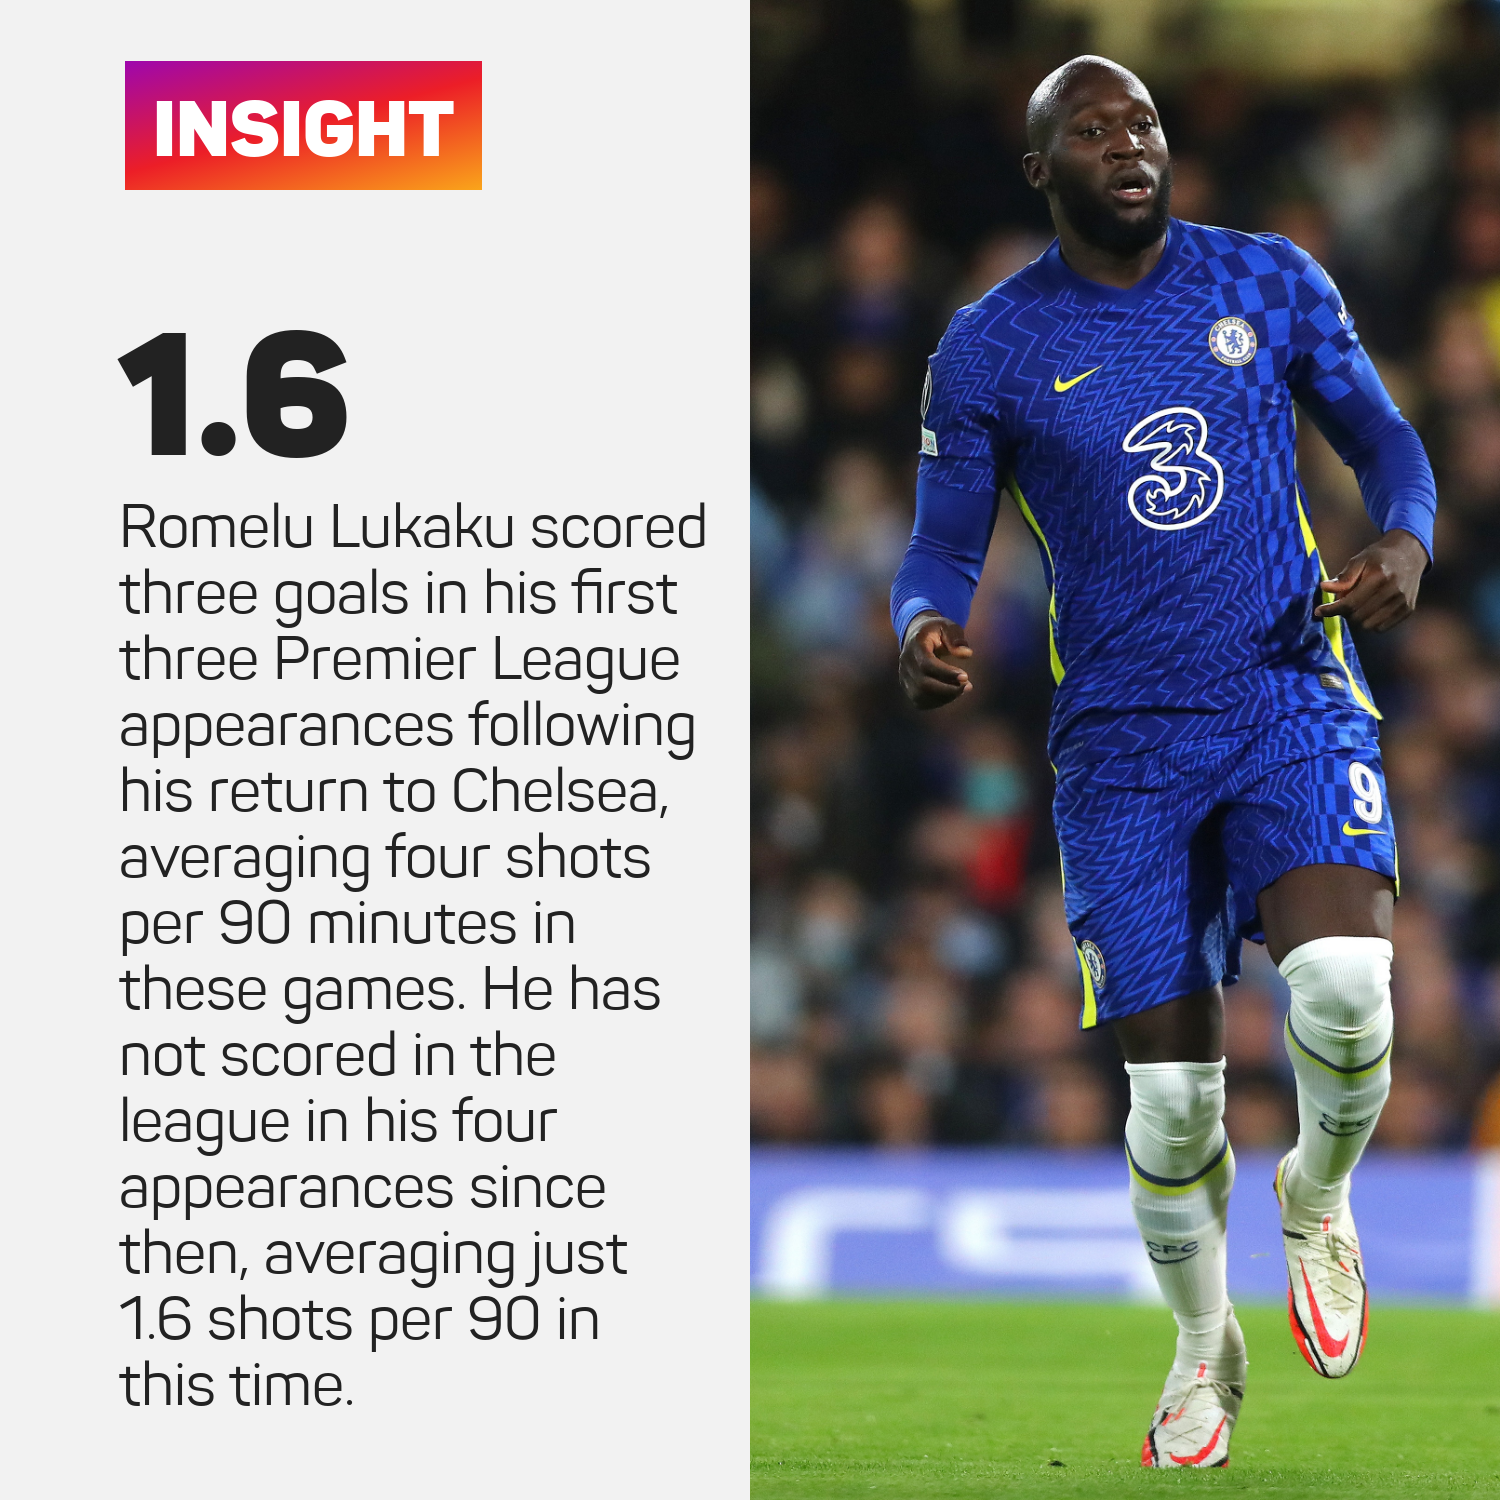 Romelu Lukaku had a brilliant start, but his form then dropped off